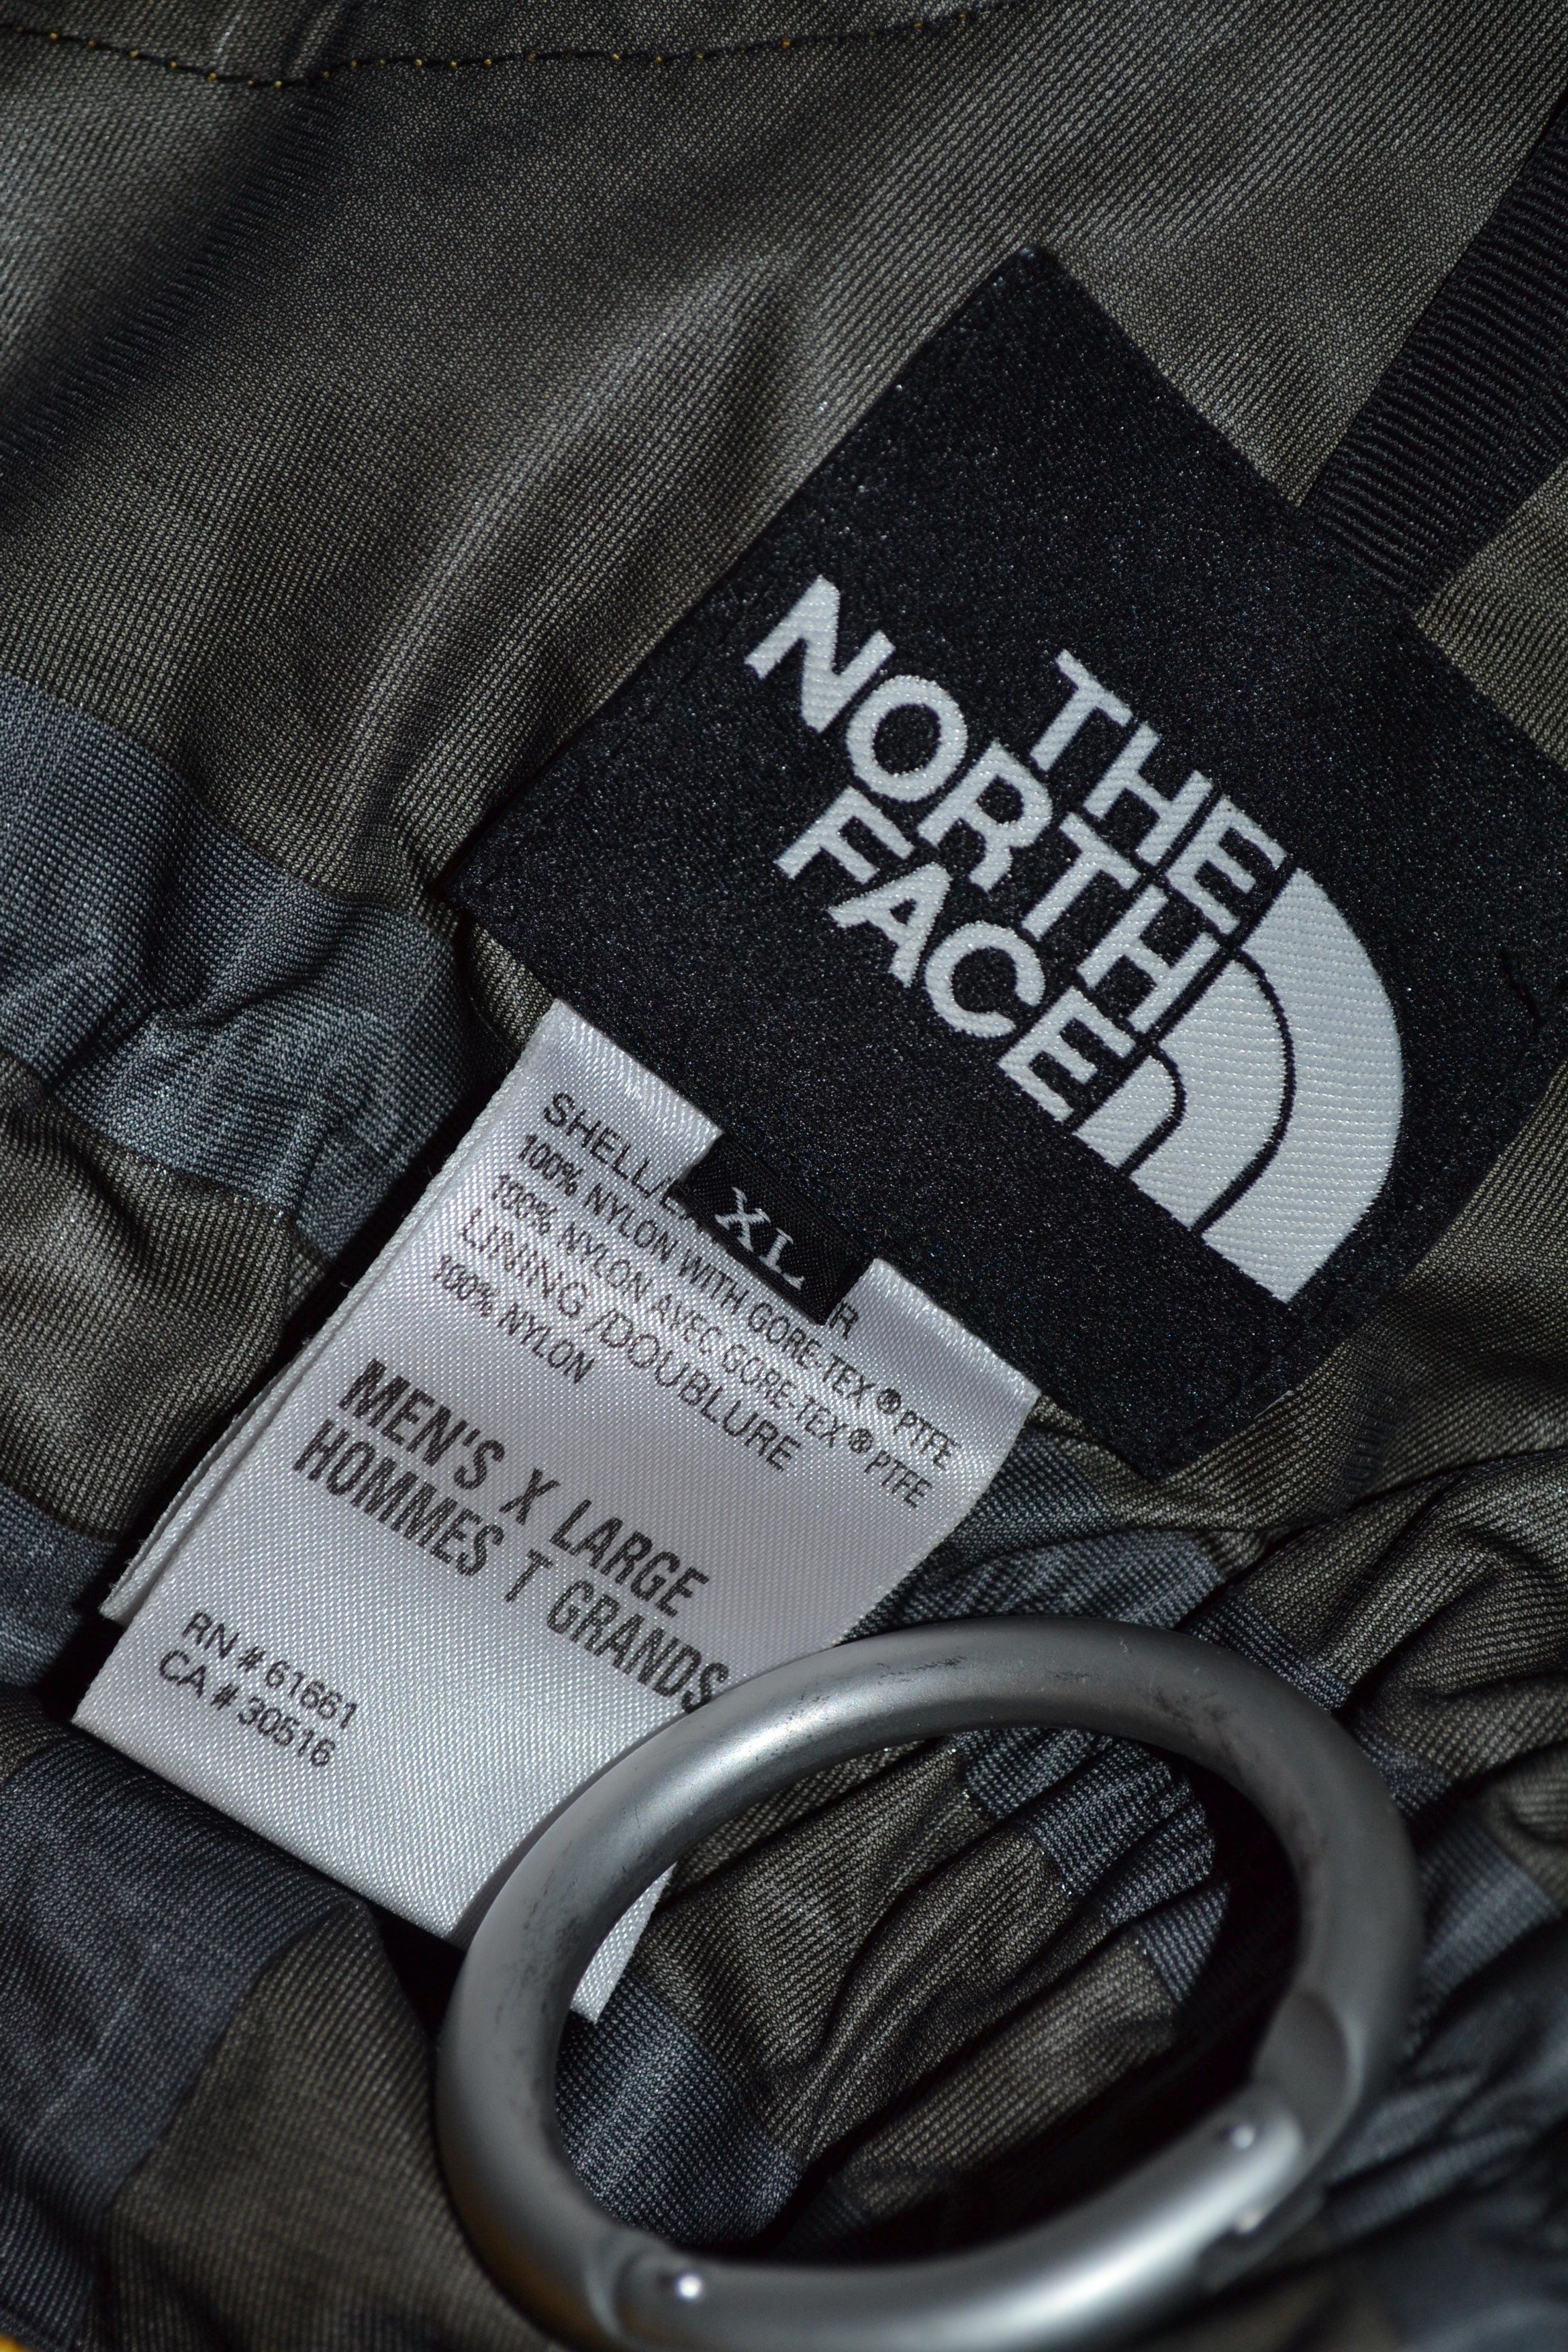 The North Face The North Face Vintage BIB XL Overall Yellow Ripstop Gore-tex Deadstock Winter Hardshell Suit Rare Supreme 90s piece Karakoram Salopette Size US 36 / EU 52 - 10 Preview